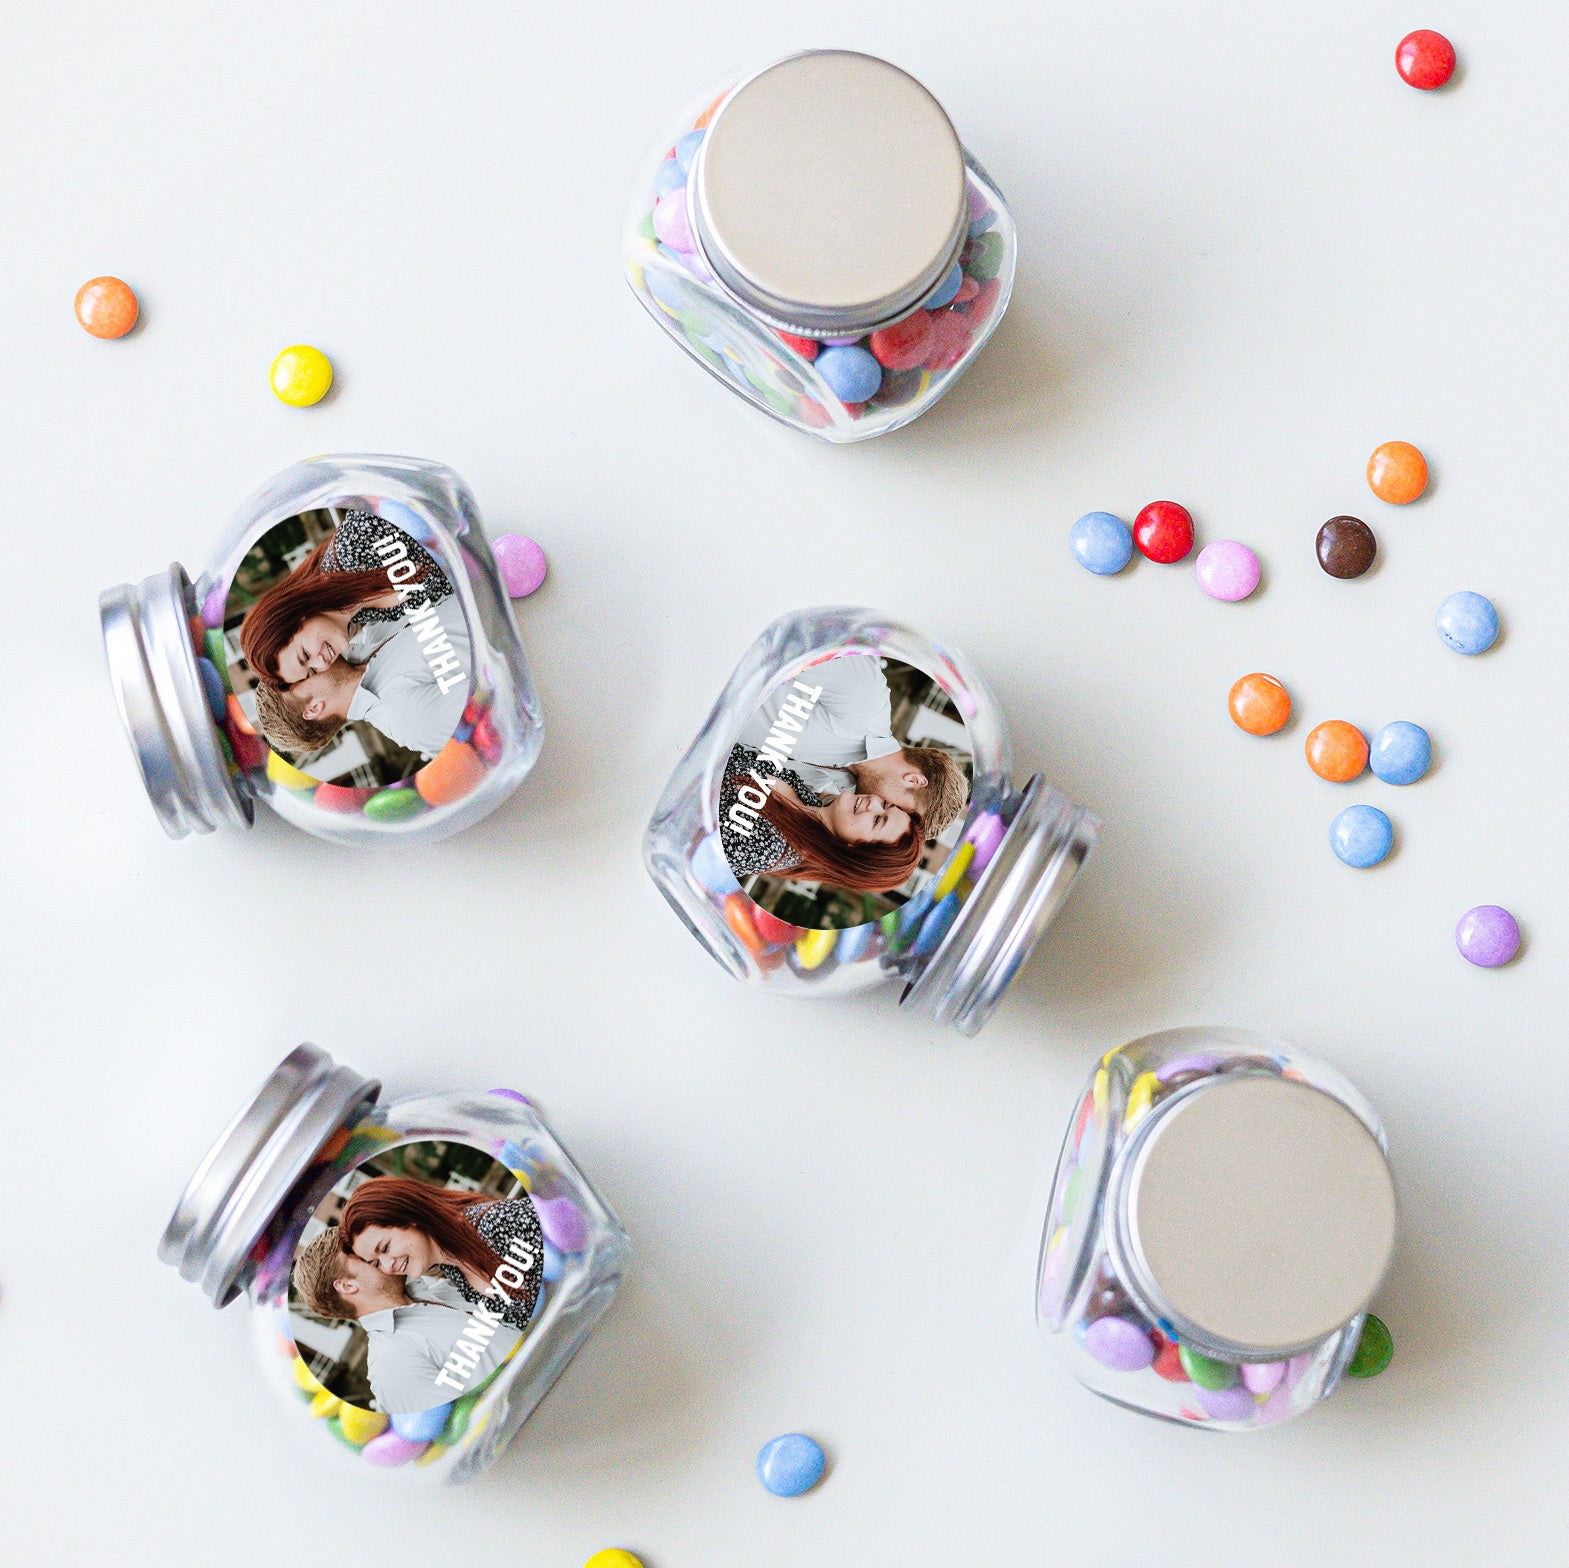 Personalised favours - Chocolates in jar - 60 pcs